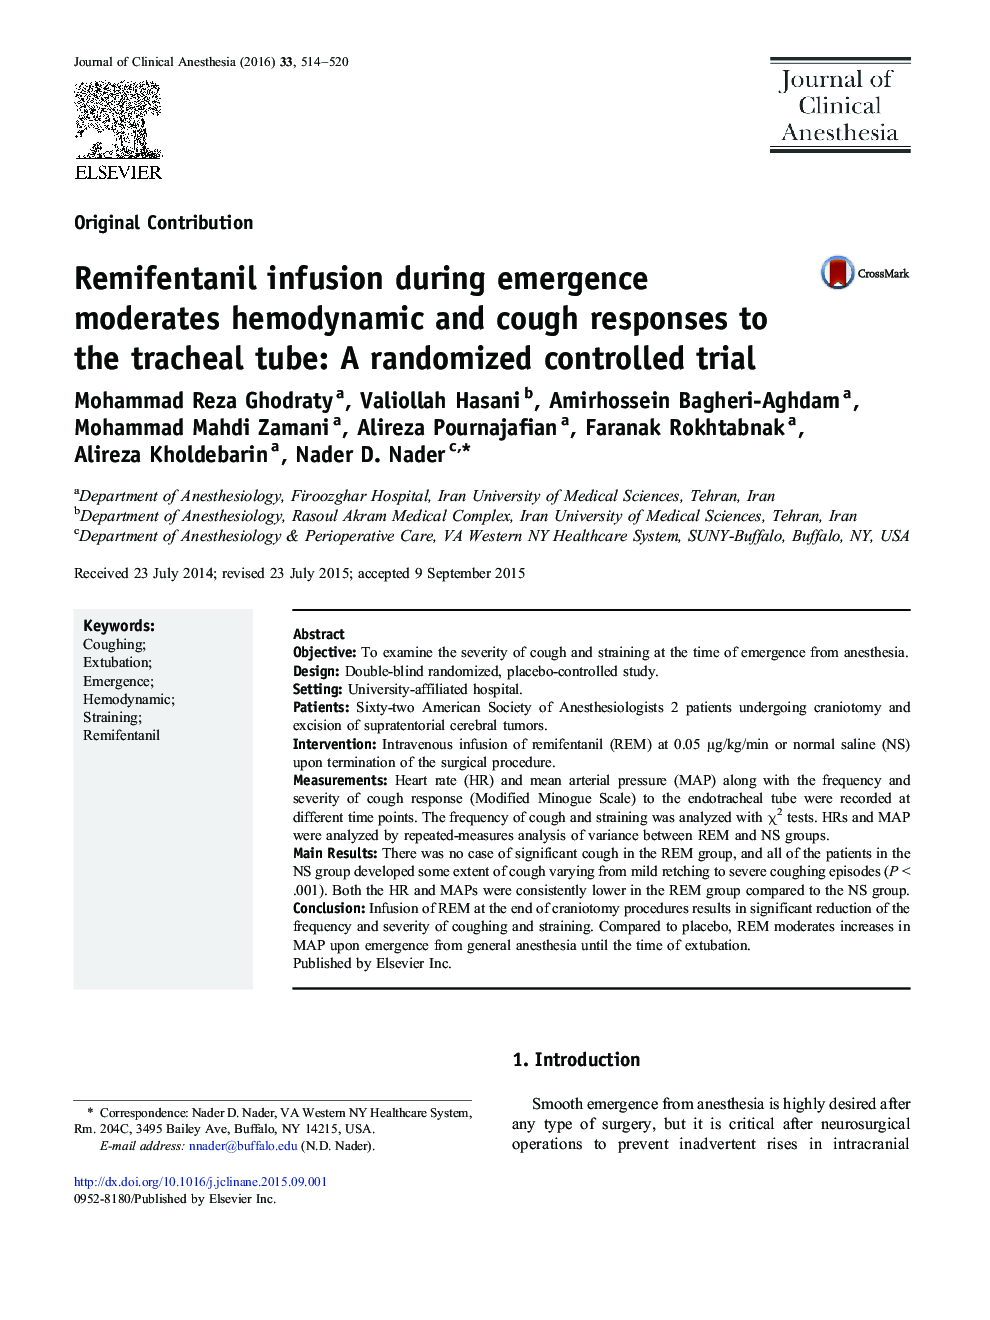 Remifentanil infusion during emergence moderates hemodynamic and cough responses to the tracheal tube: A randomized controlled trial